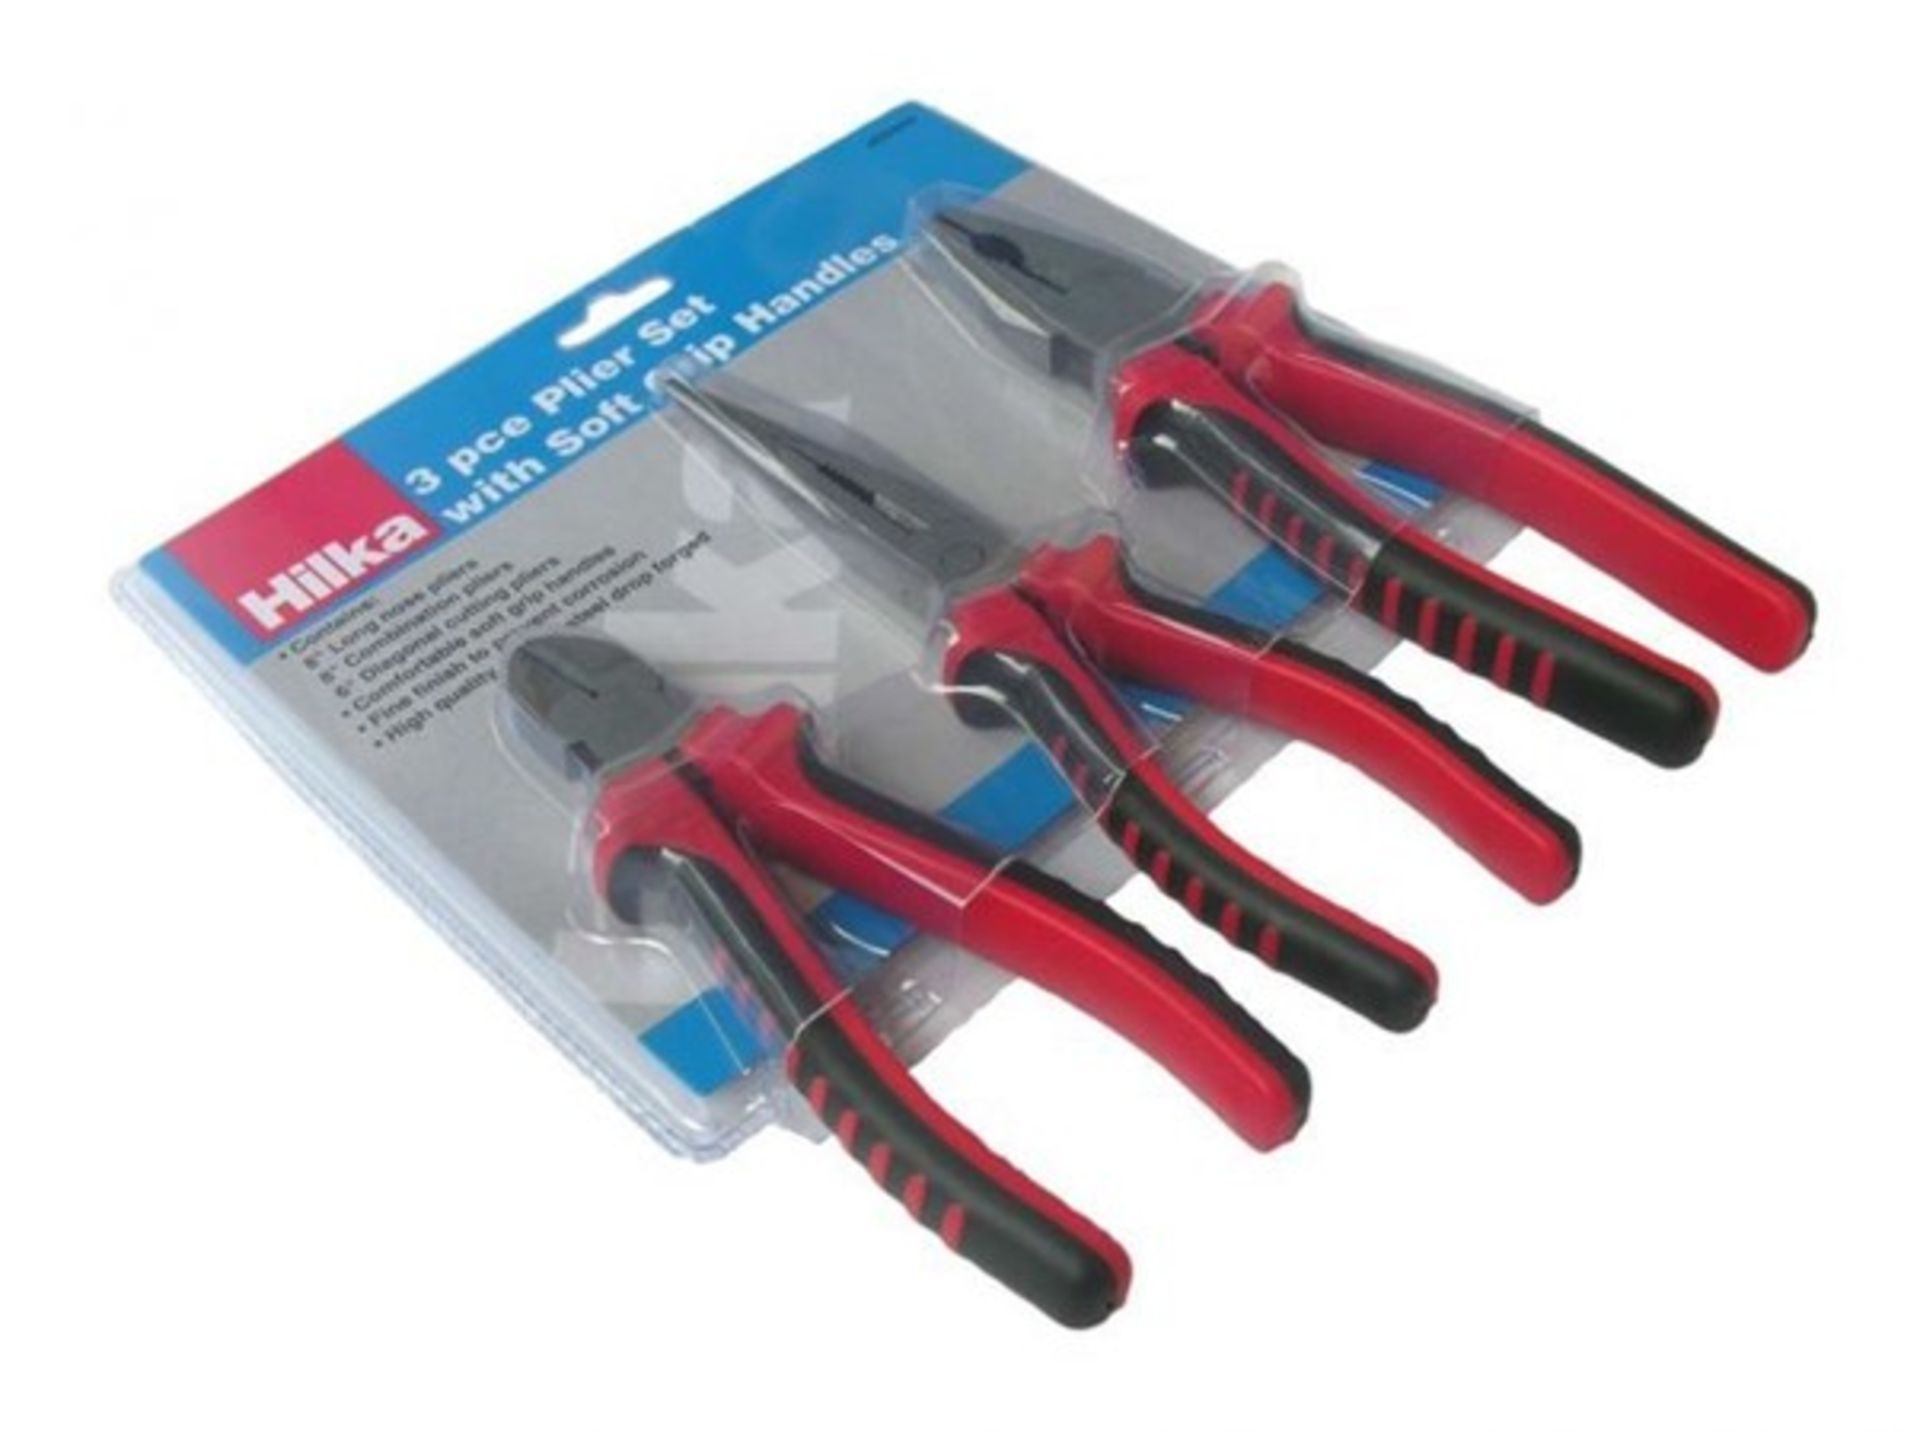 New Hilka 3 pce Pliers Set with Soft Grip Handles - Contains: 8" long nose pliers, 8" combination